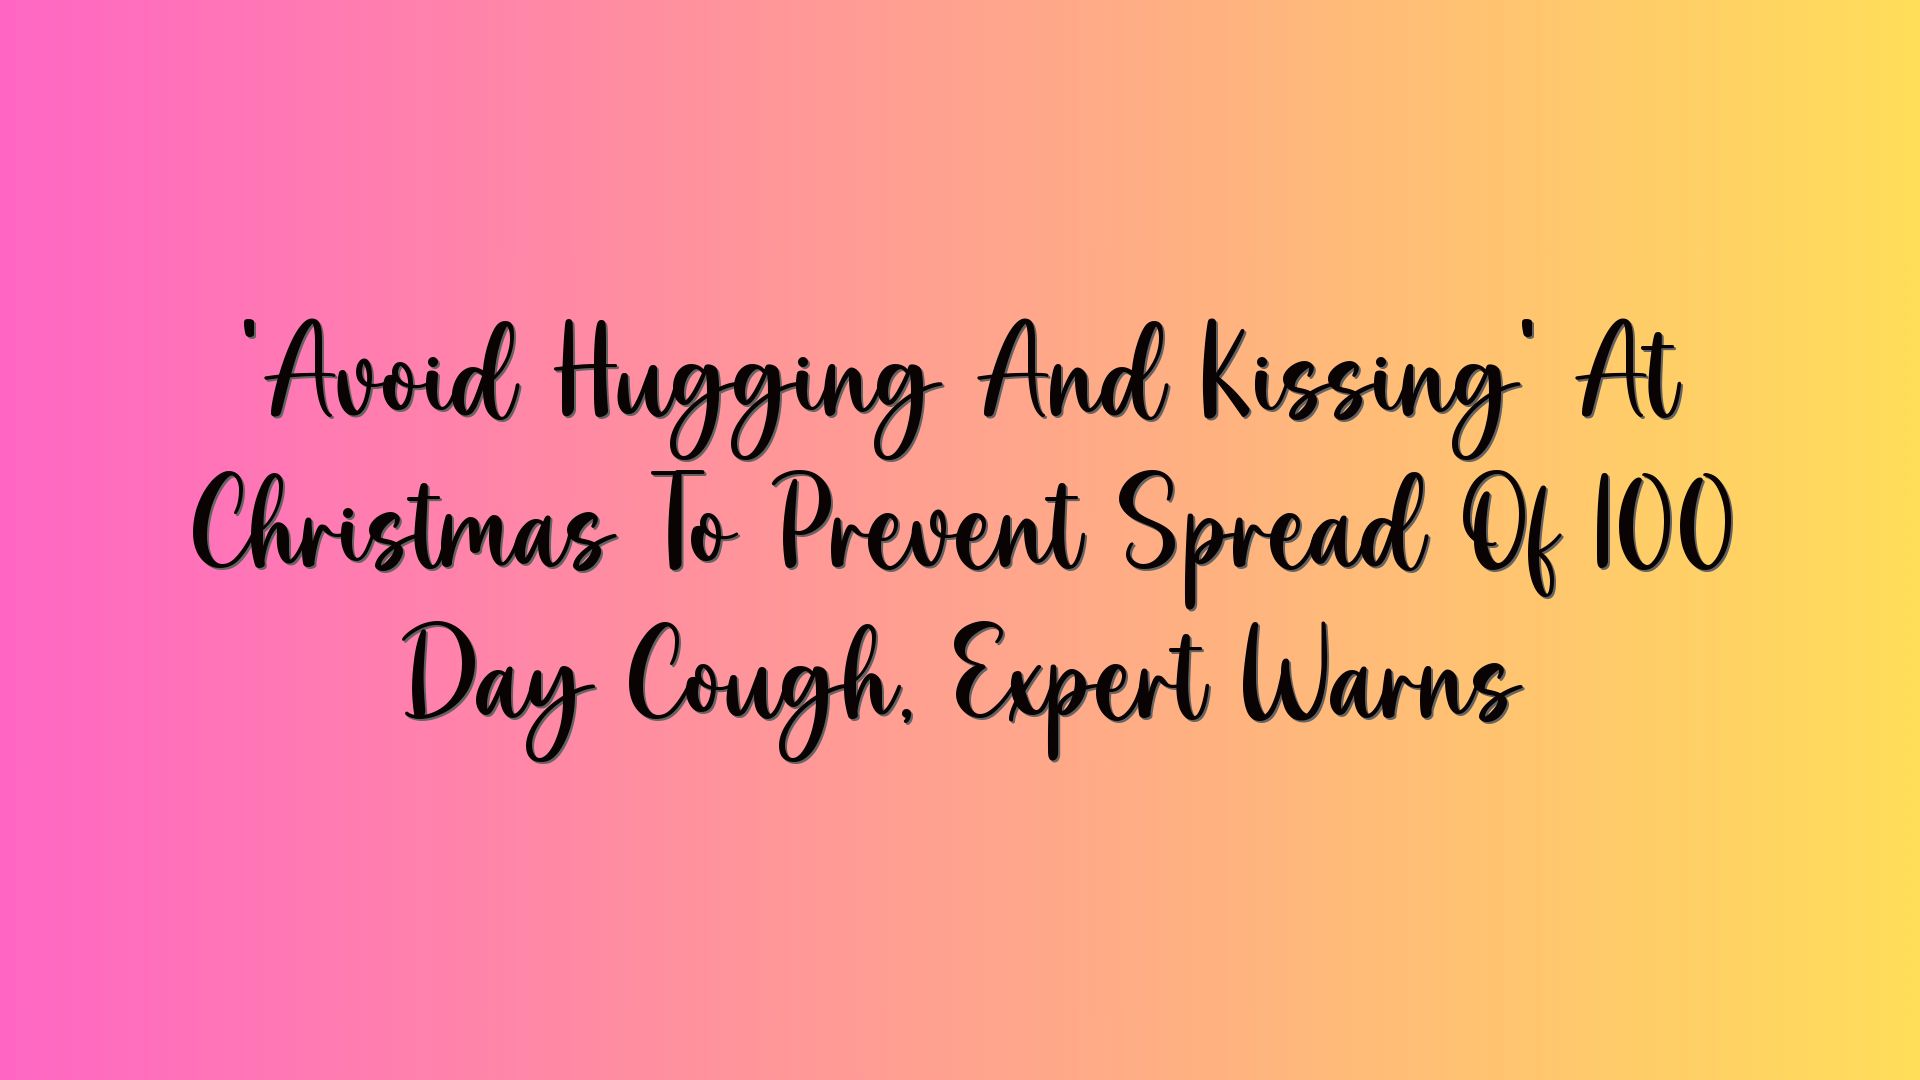 ‘Avoid Hugging And Kissing’ At Christmas To Prevent Spread Of 100 Day Cough, Expert Warns